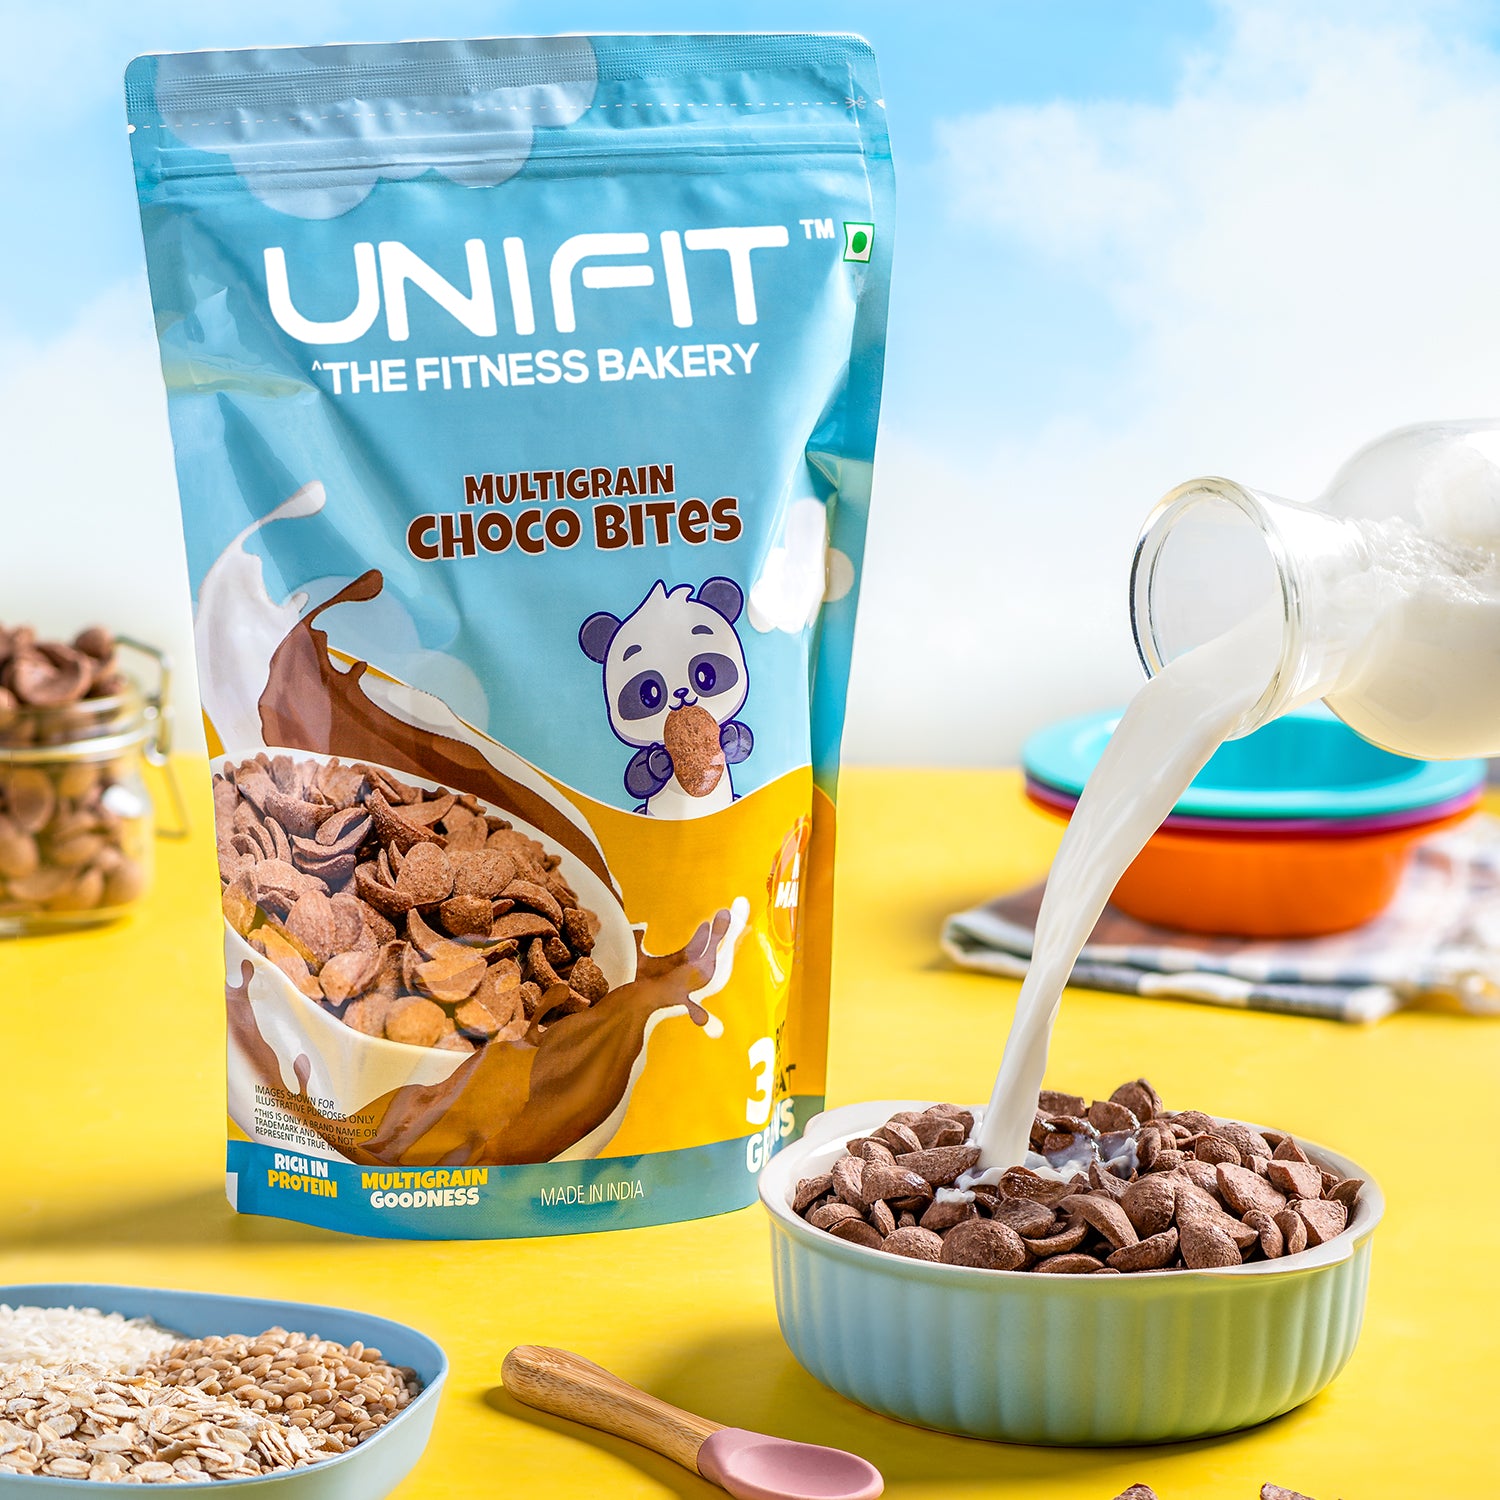 UNIFIT Multigrain Choco Bites: Delicious and Nutritious Snack Choice. 